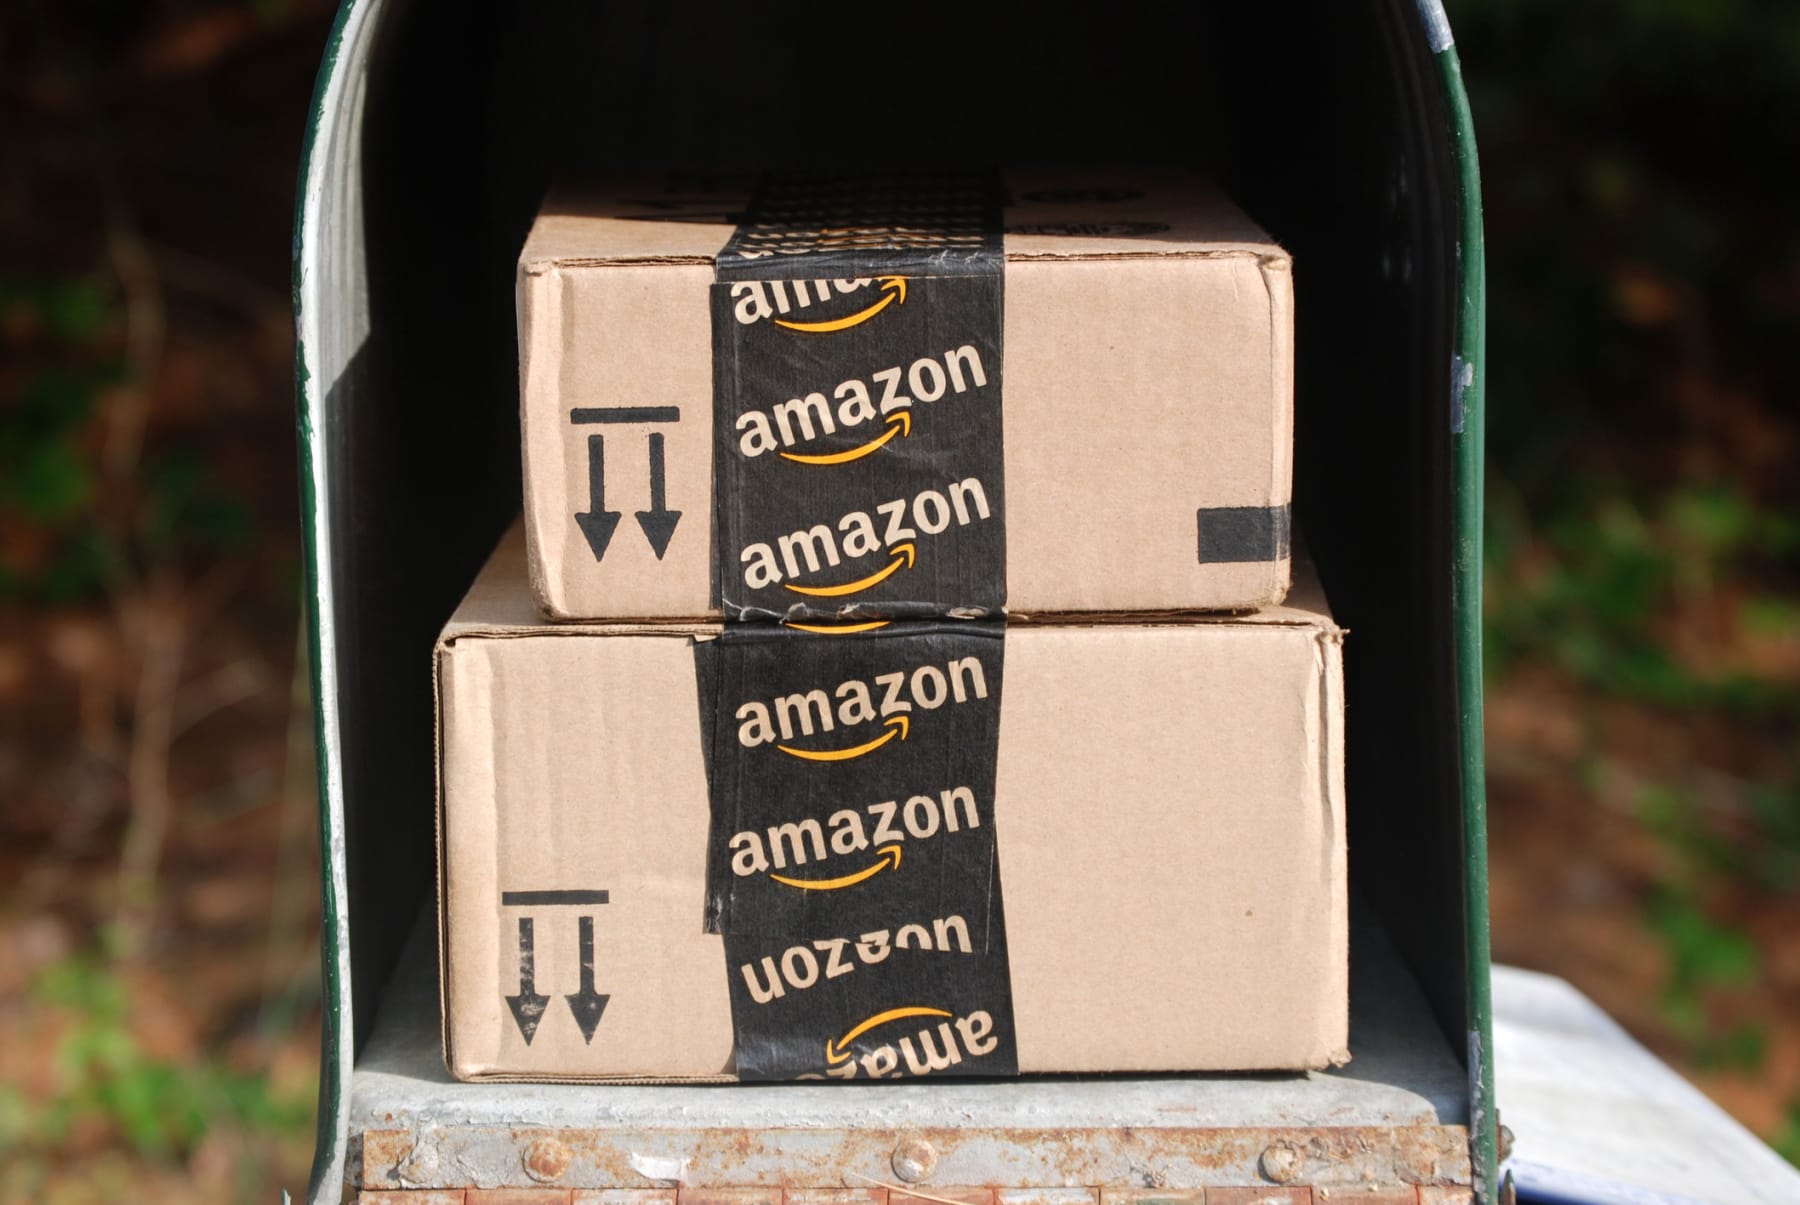 Two Amazon packages are stacked in mailbox.